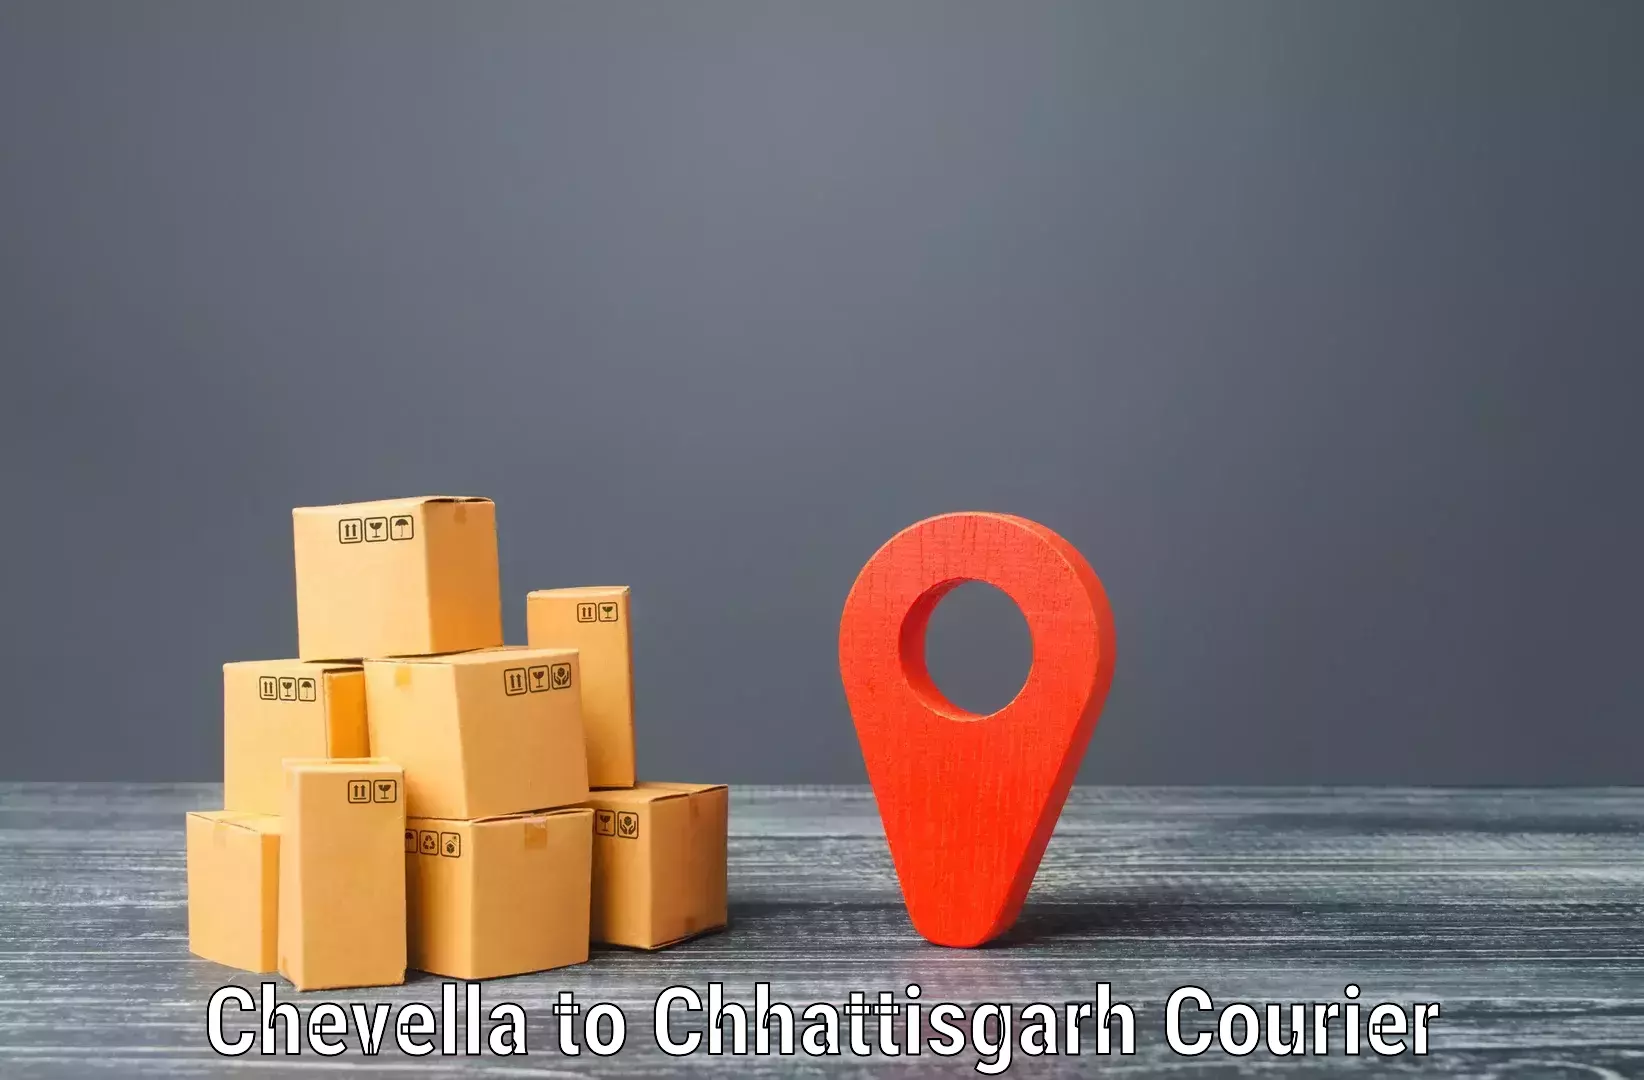 Same-day delivery solutions Chevella to Lailunga